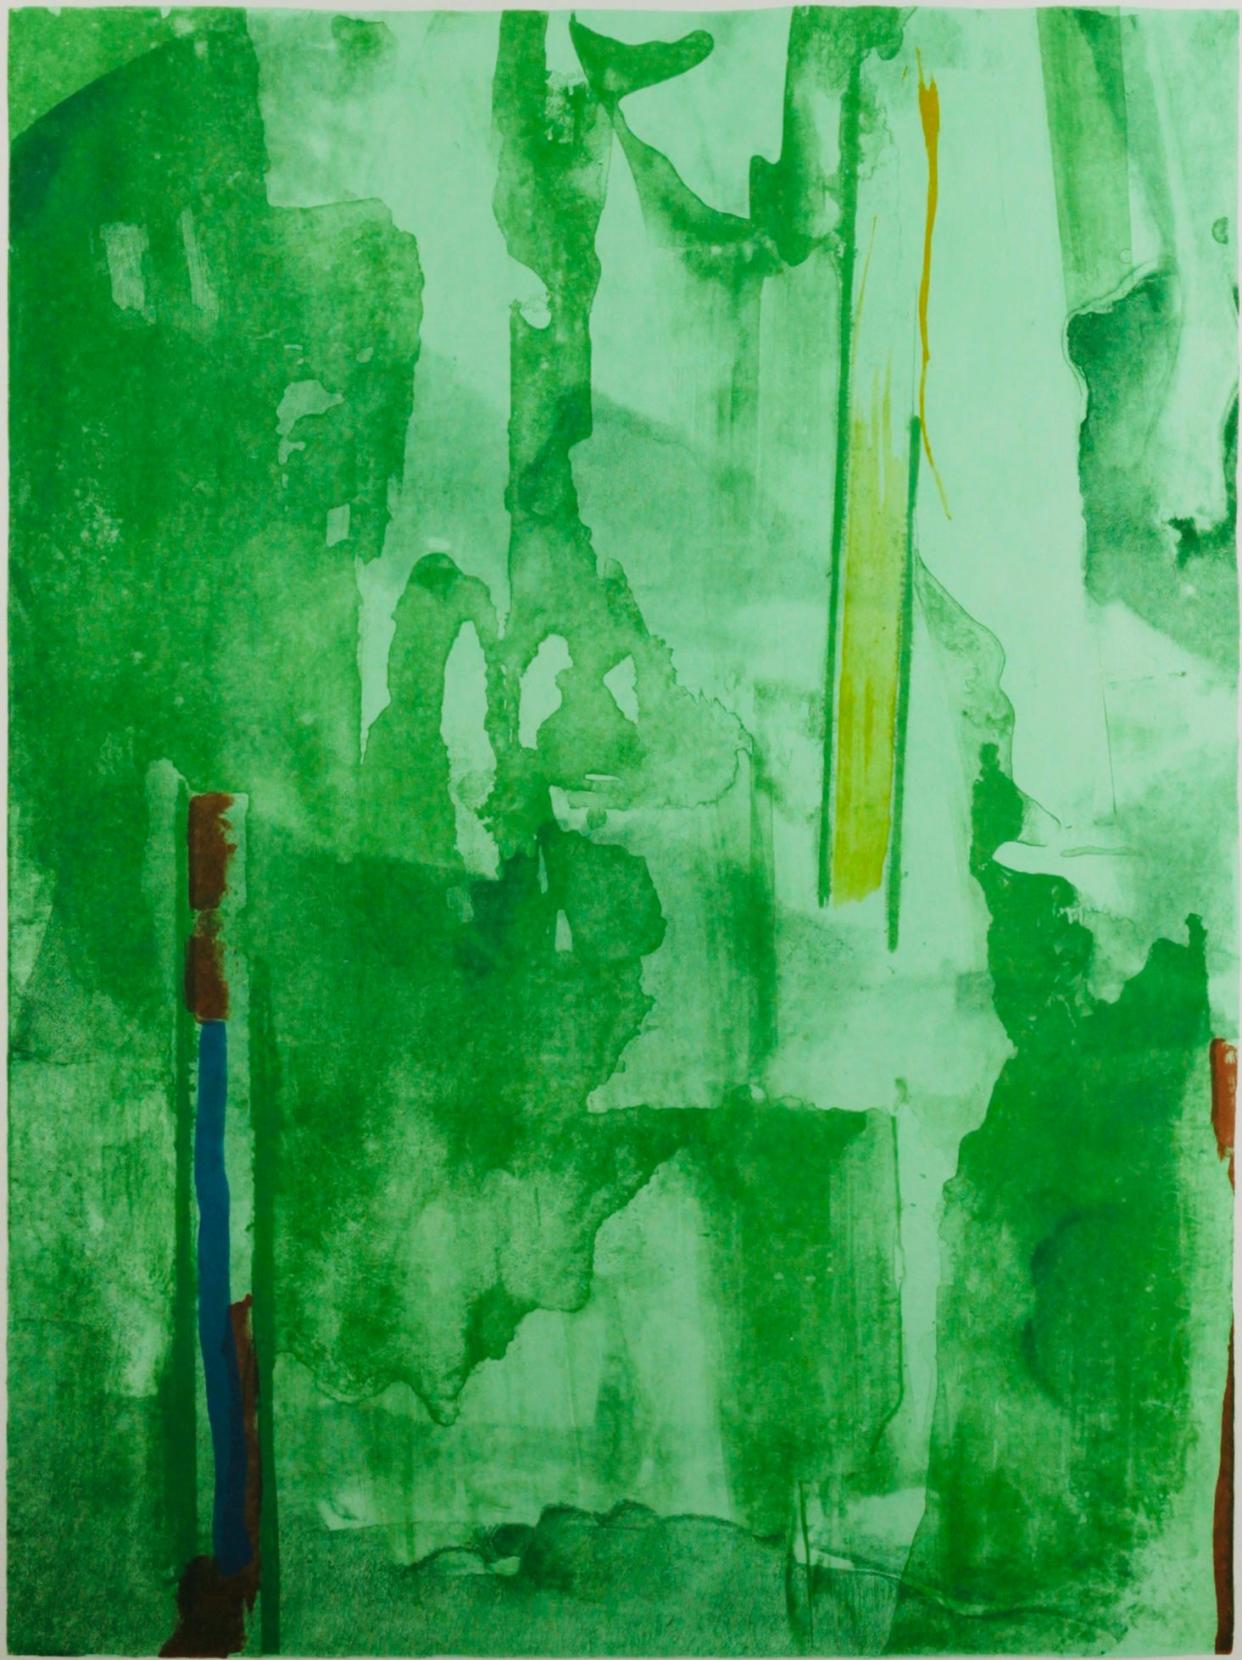 Barcelona, a lithograph on handmade paper, is the work of artist Helen Frankenthaler and is currently on display at the Washington County Museum of Fine Arts.